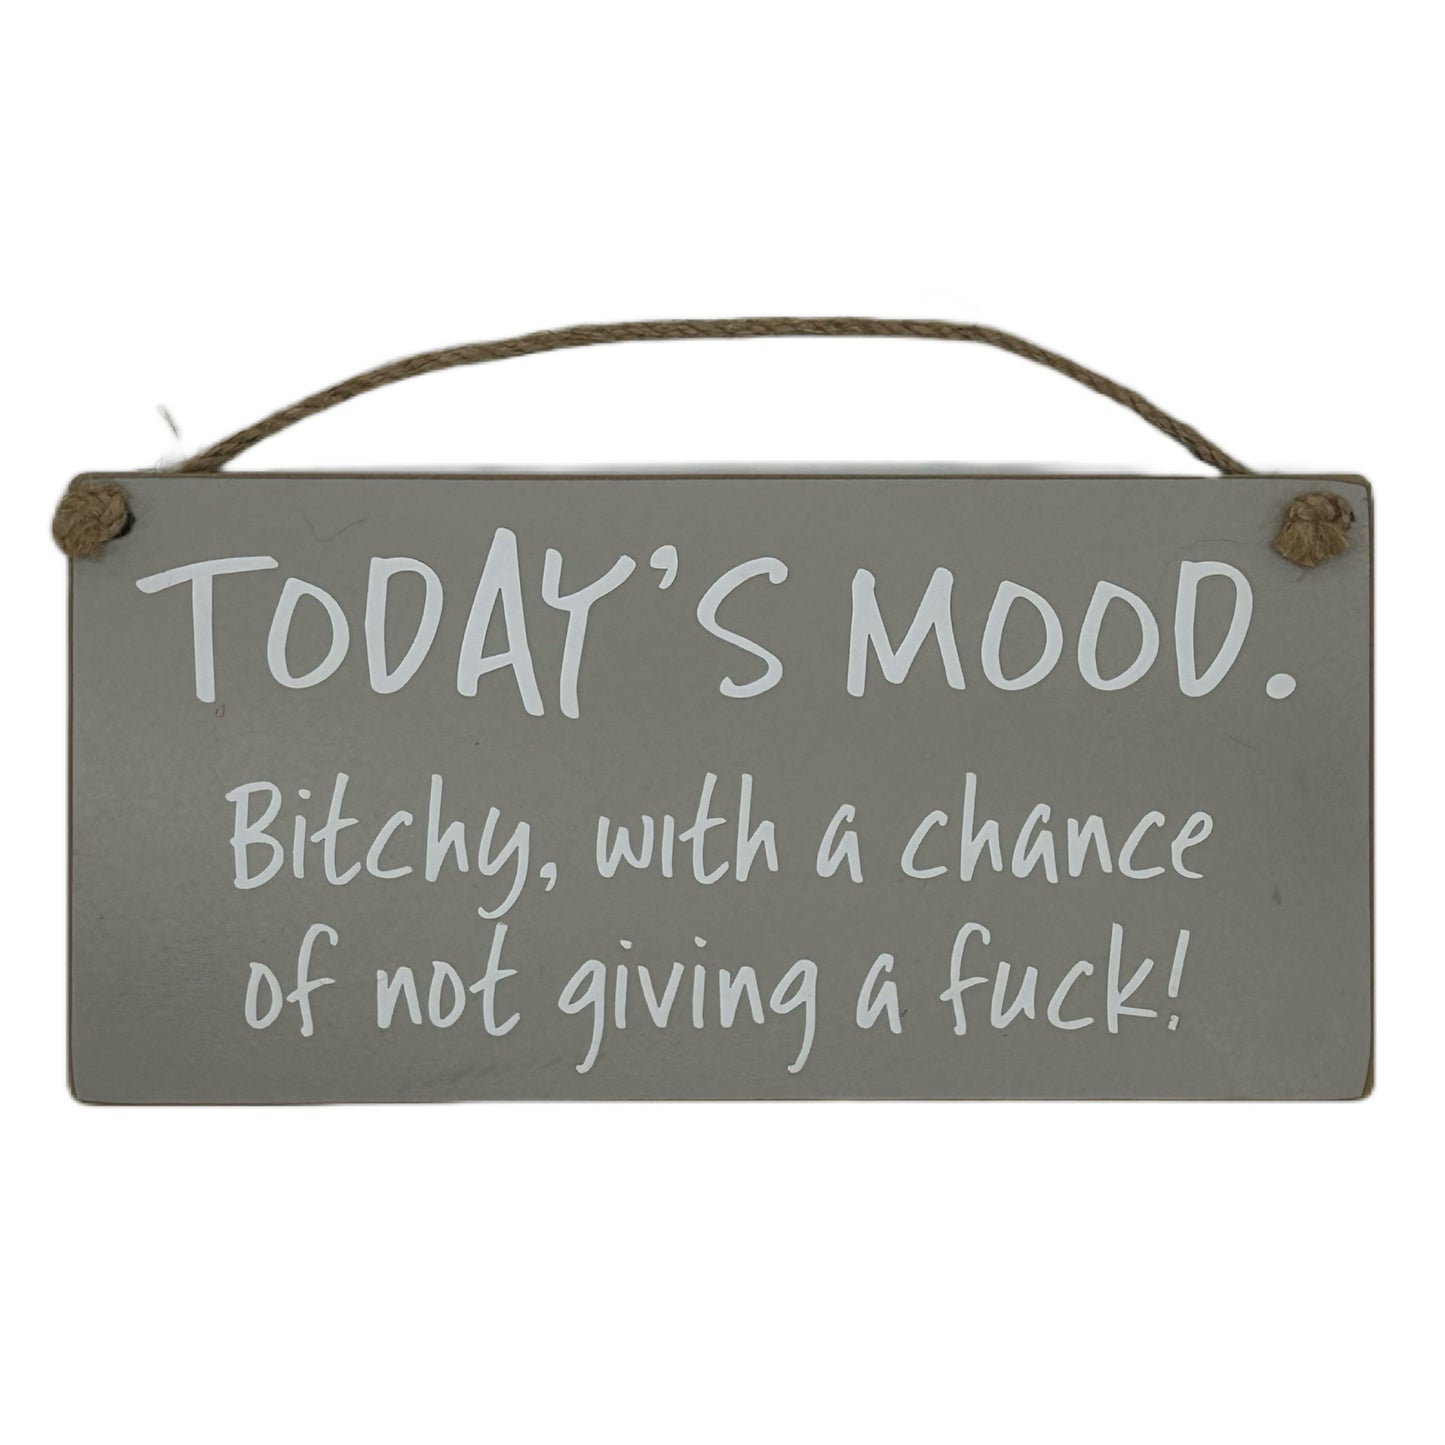 TODAY'S MOOD, Bitchy with a strong chance of not giving a fuck!